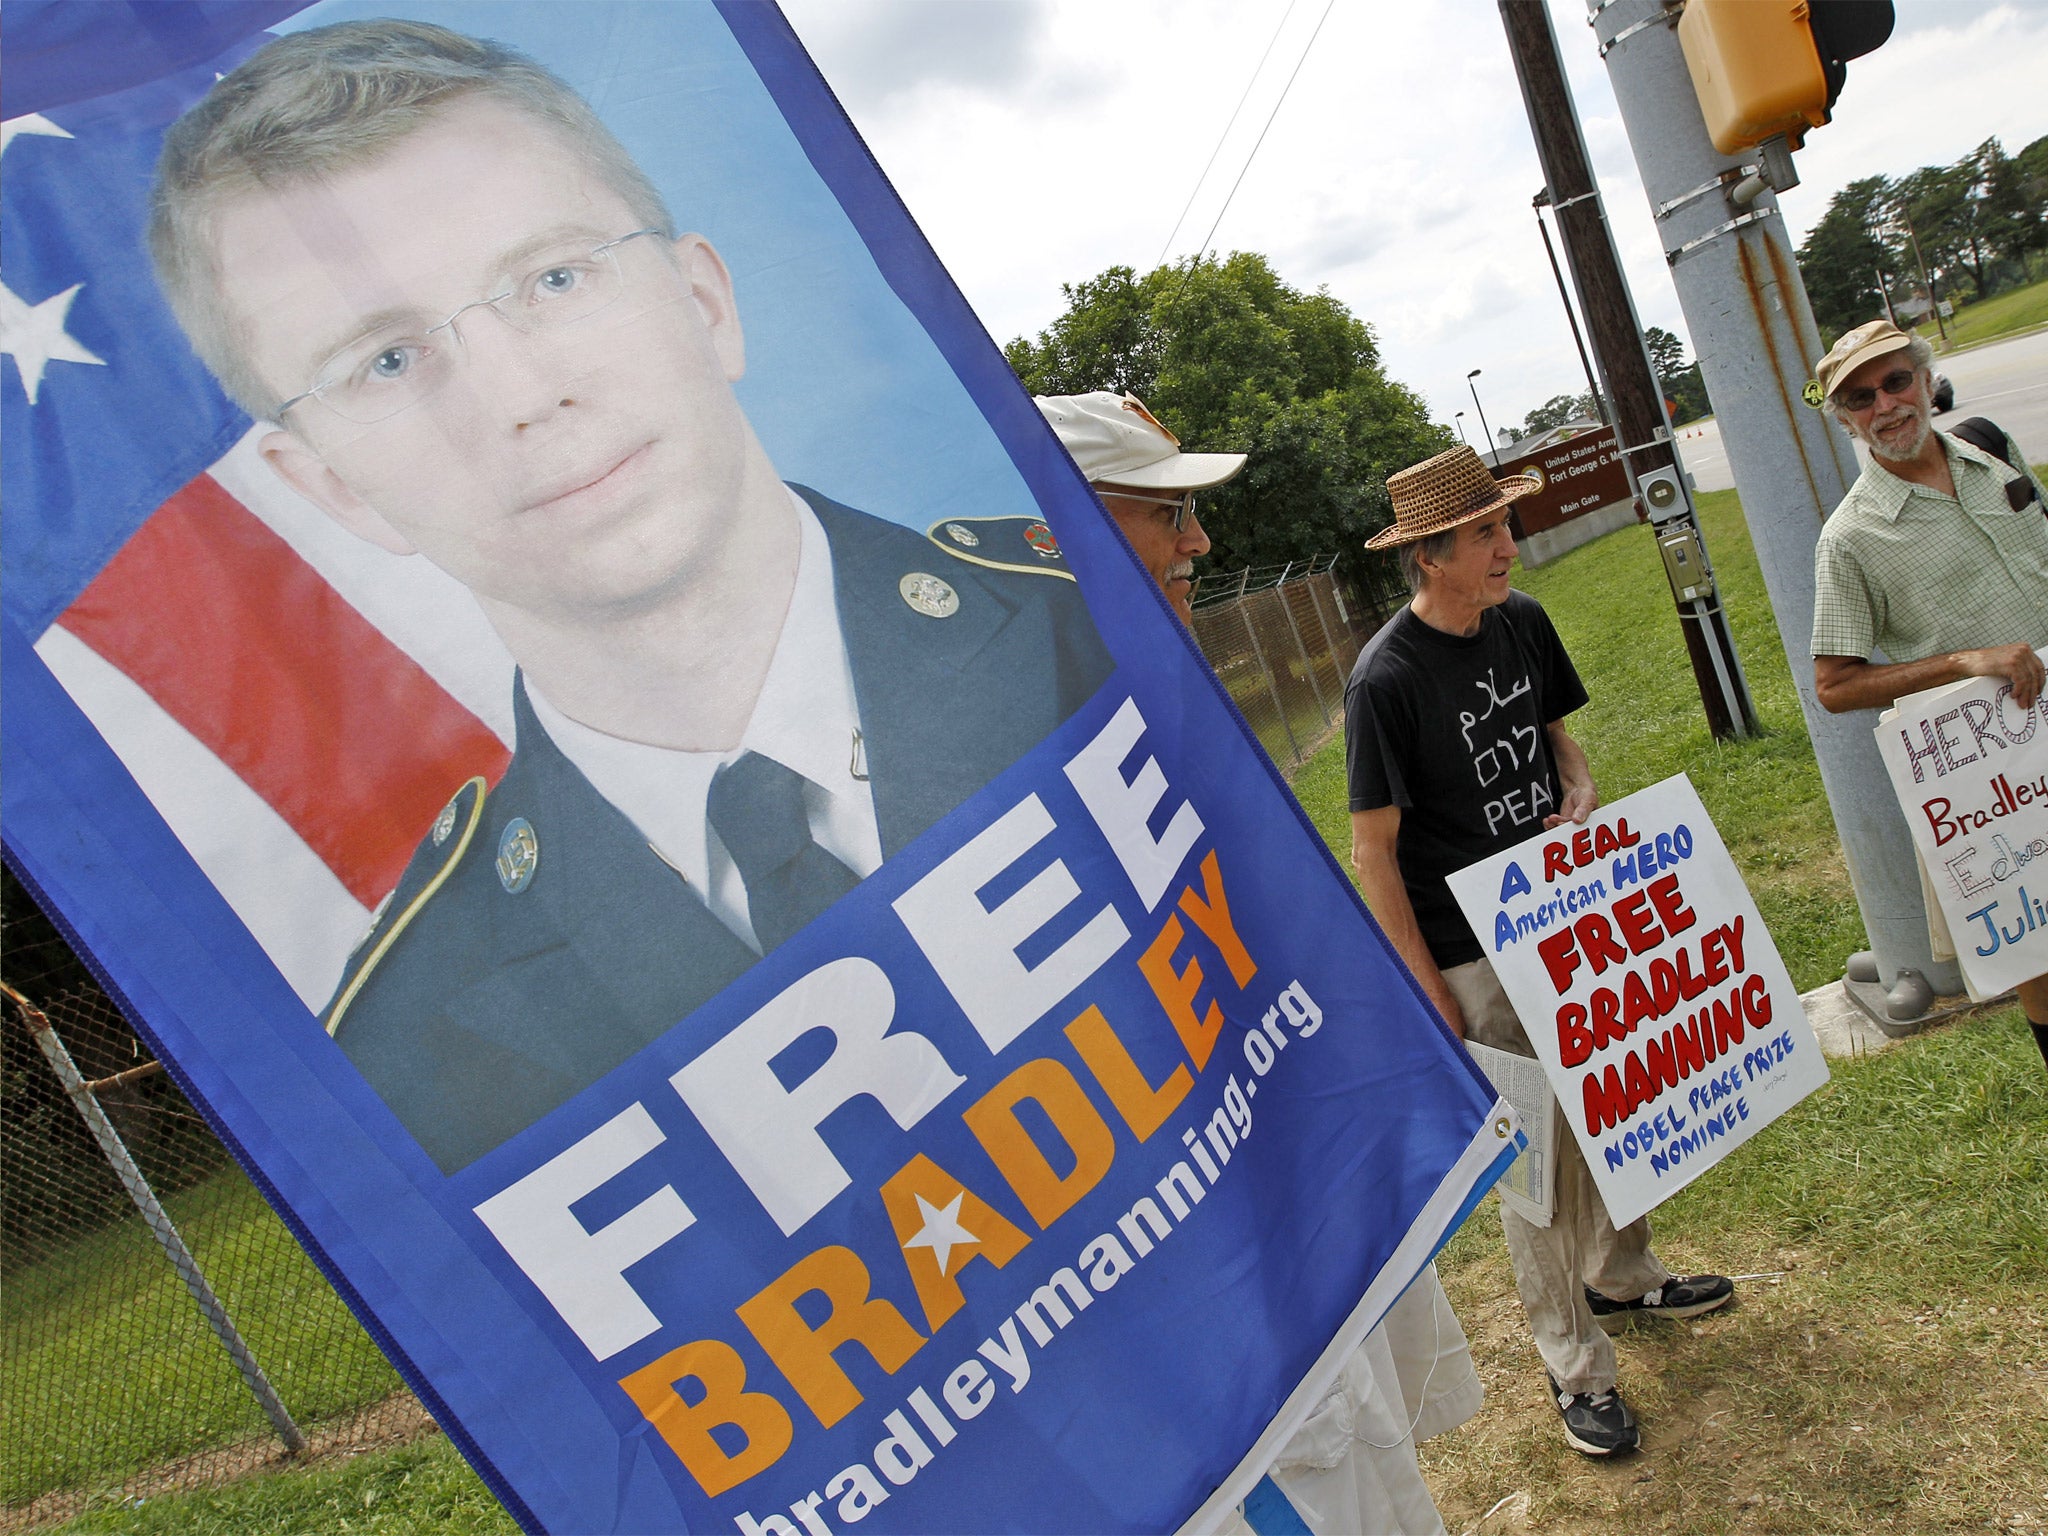 Supporters of Bradley Manning outside the gates at Fort Meade on Tuesday